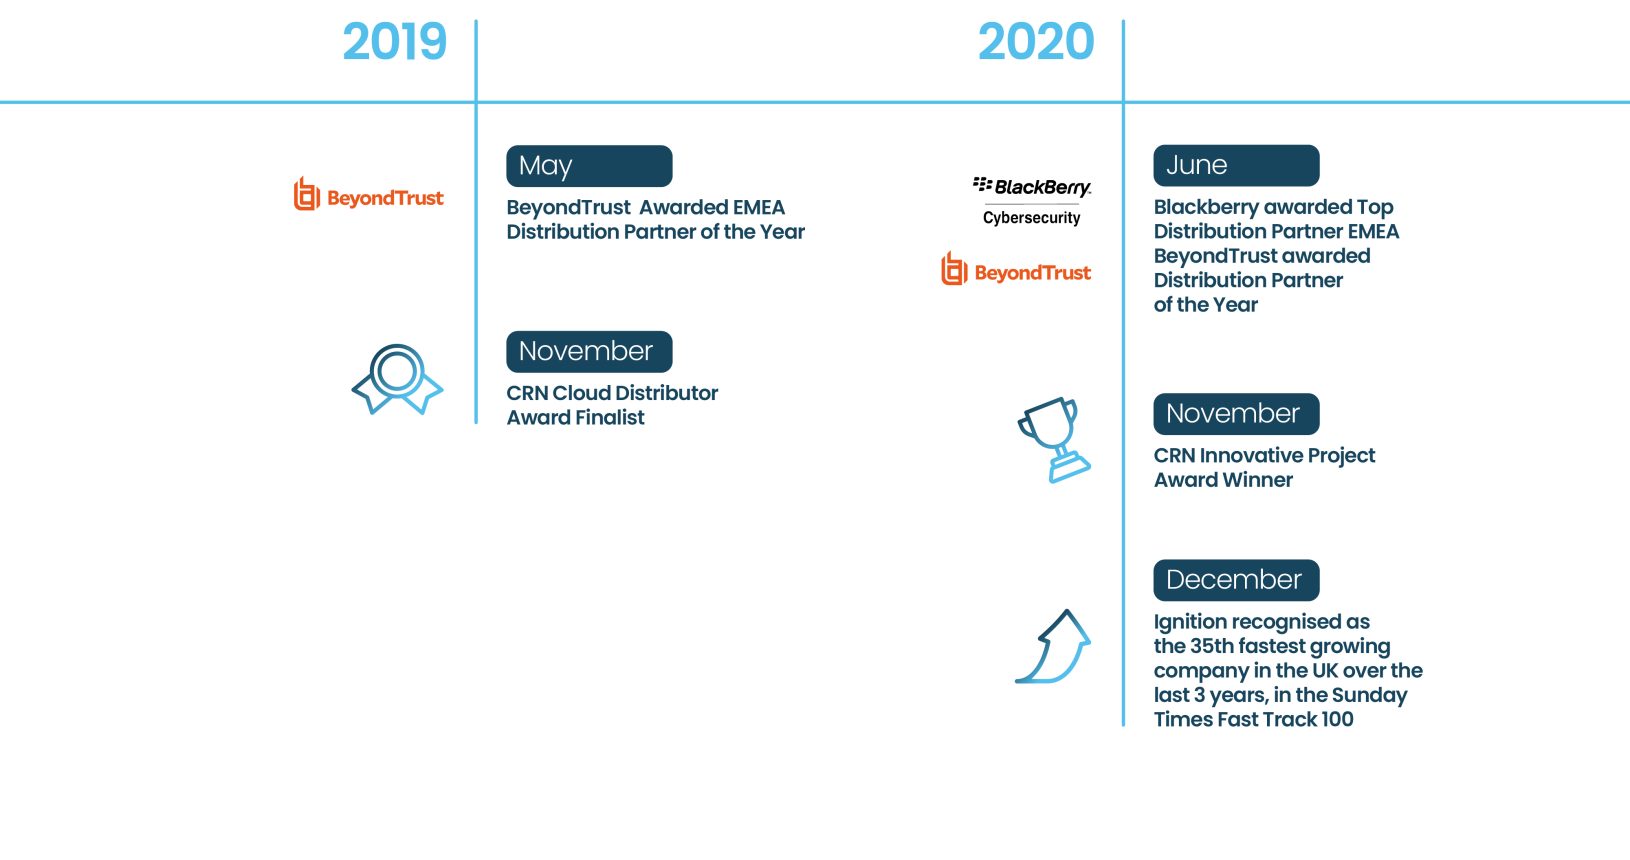 Our Story timeline, years 2019 to 2020